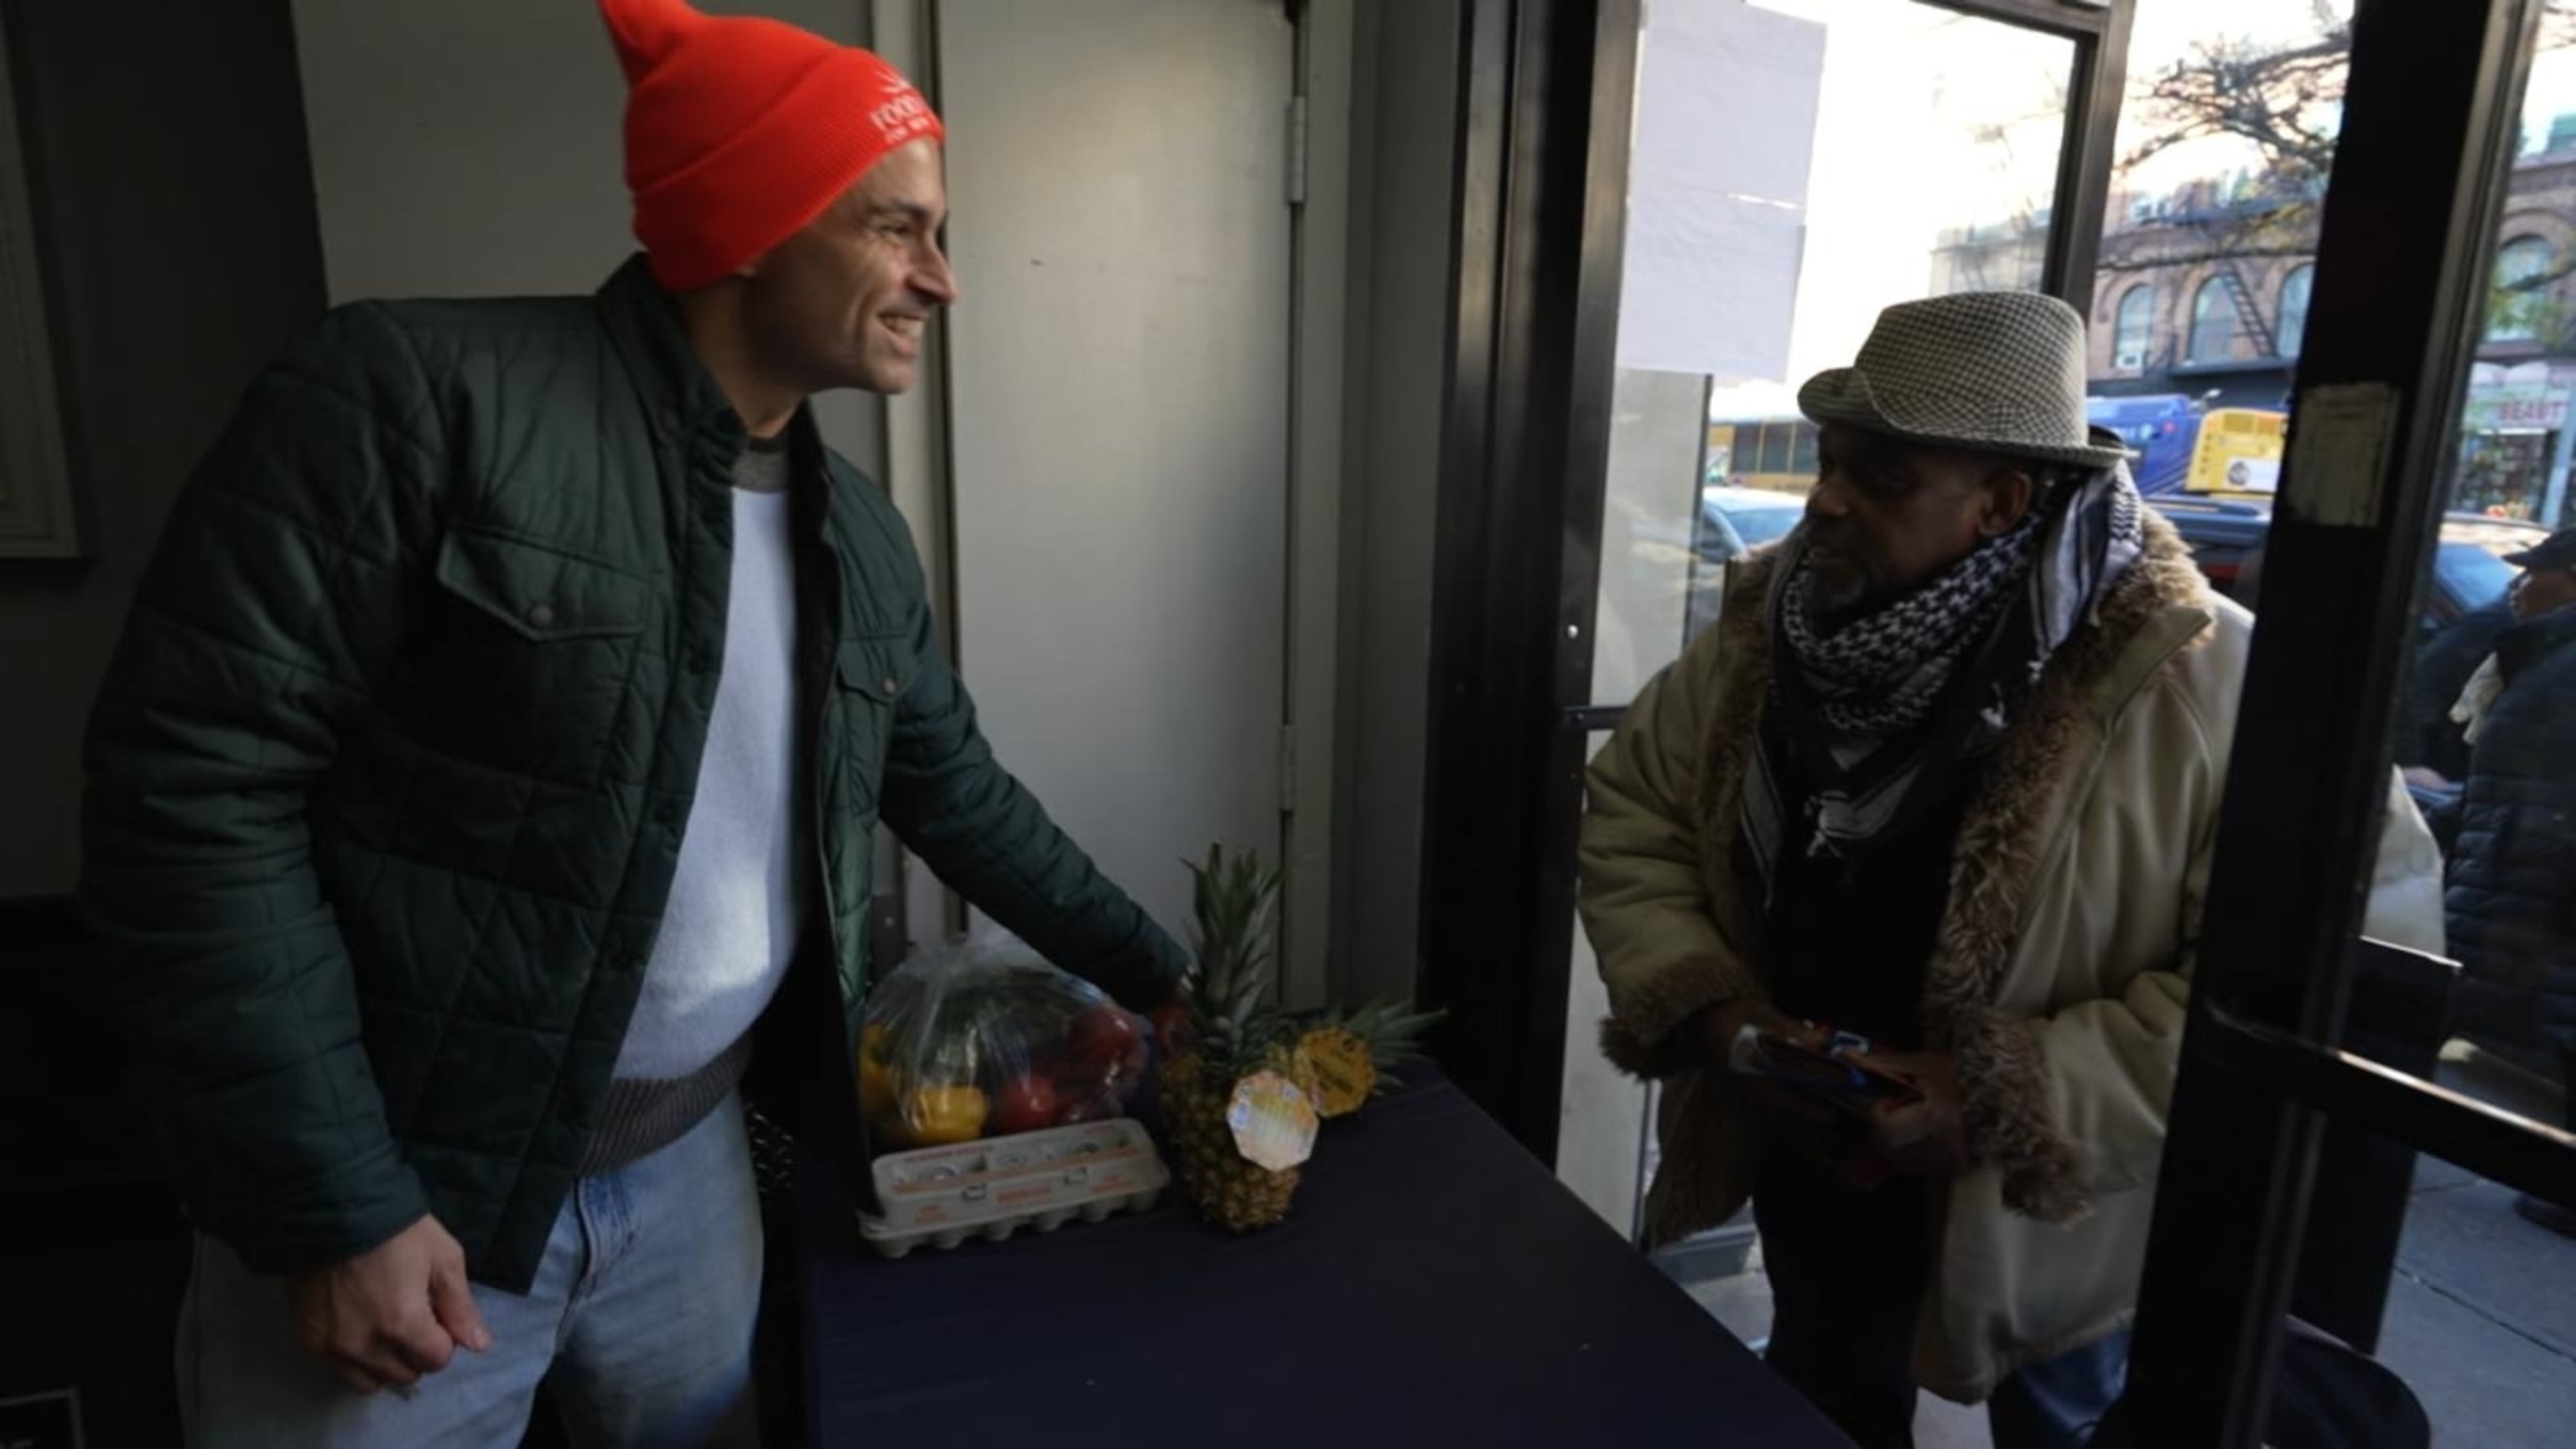 PHOTO: A volunteer from Food Bank for New York City's Community Kitchen and Pantry helps hand out food donations in New York City.